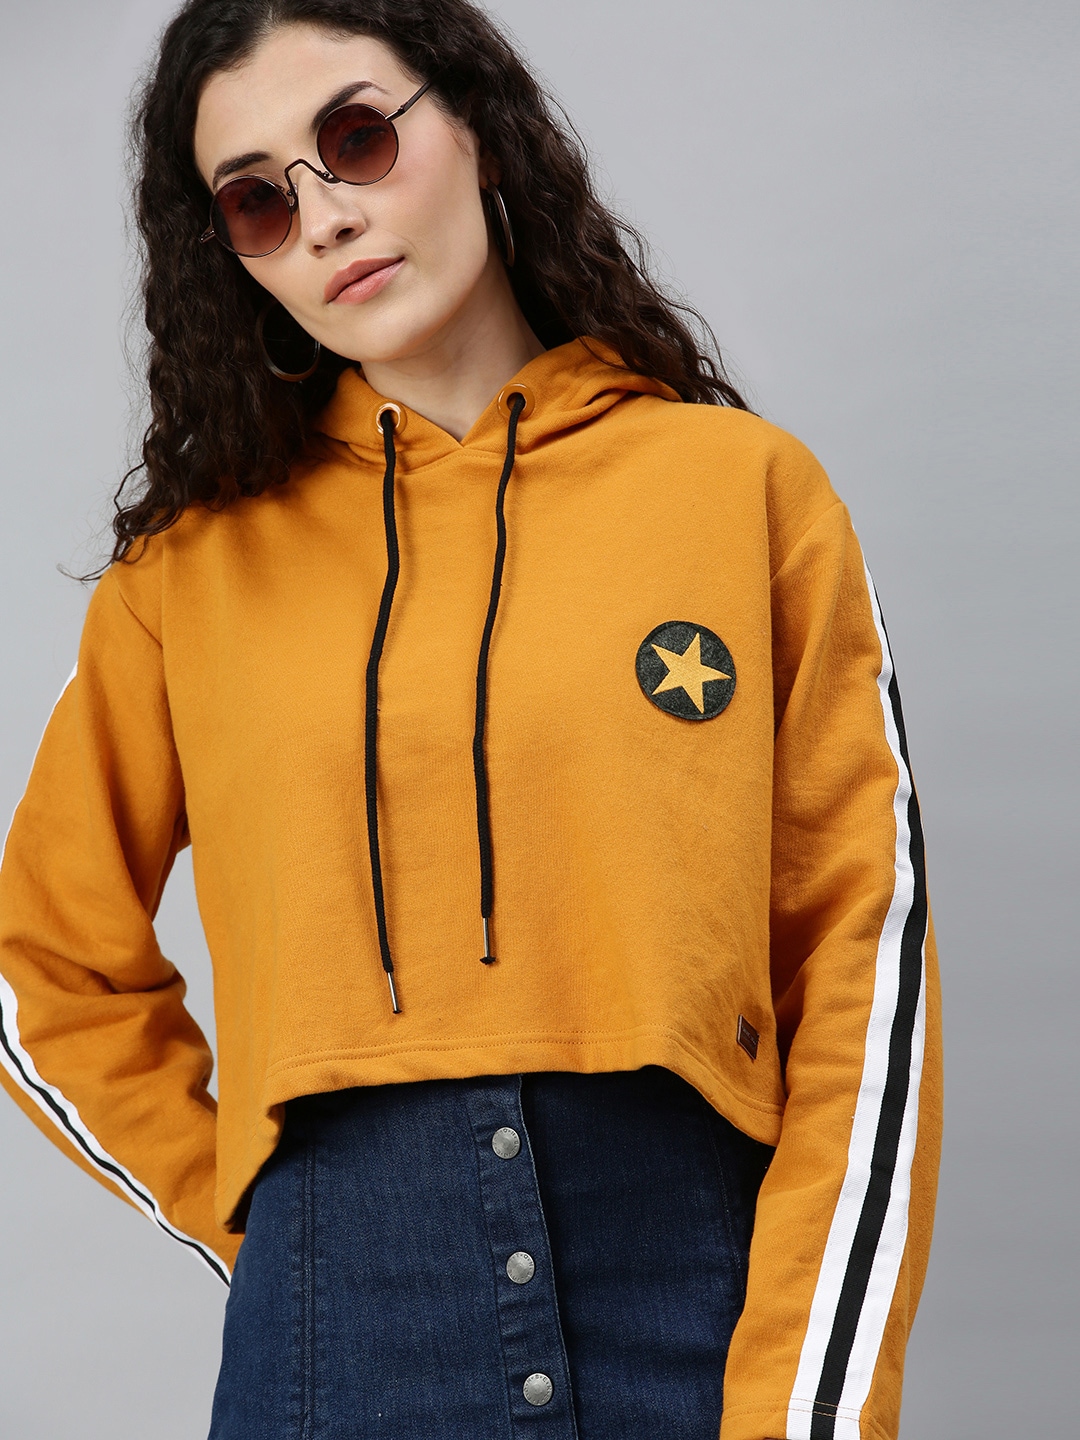 Campus Sutra Women Mustard Yellow Solid Hooded Pure Cotton Cropped Sweatshirt Price in India